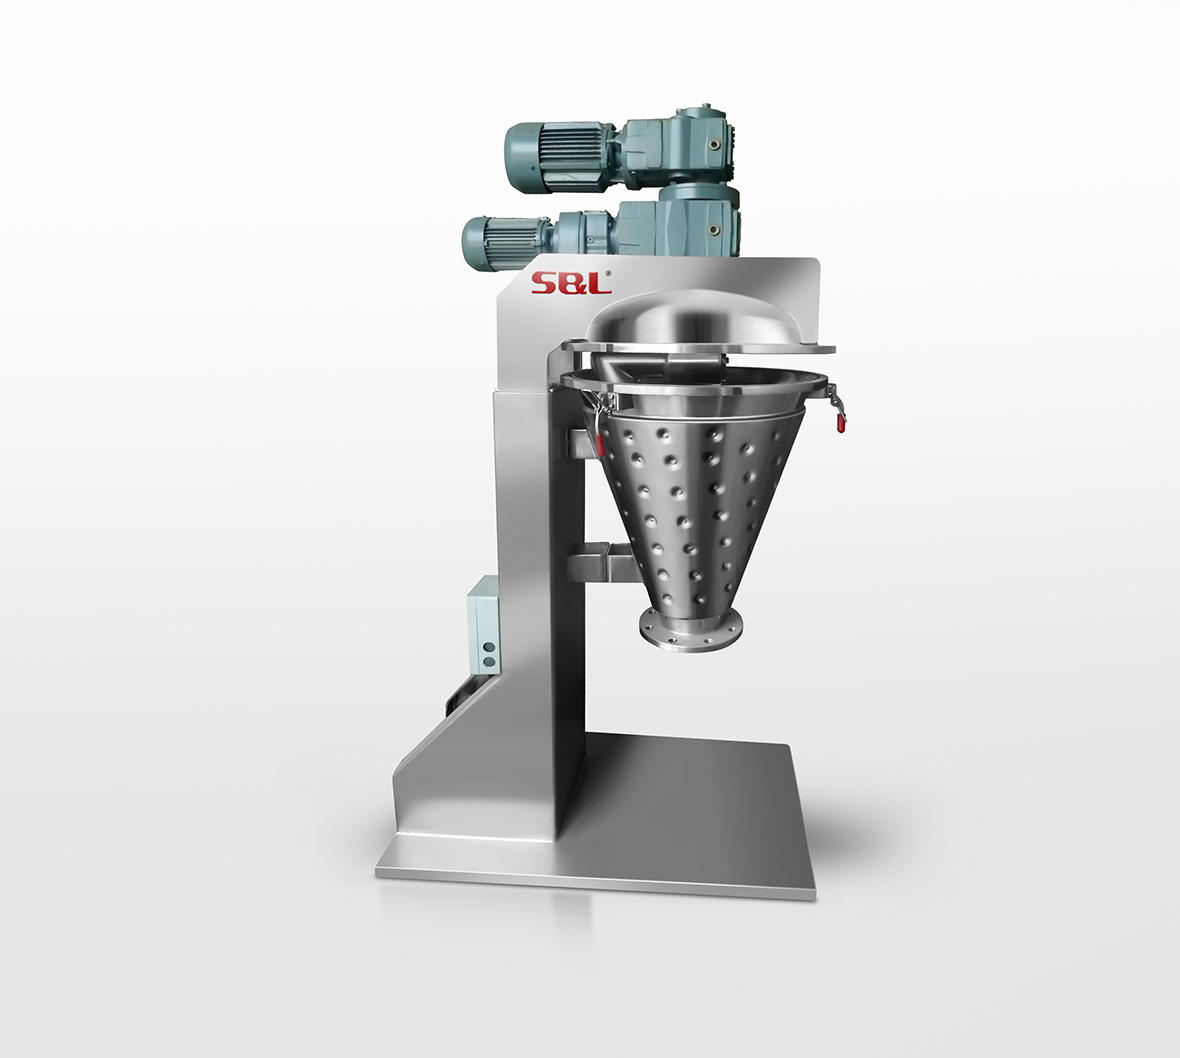 CPM, conical paddle mixer